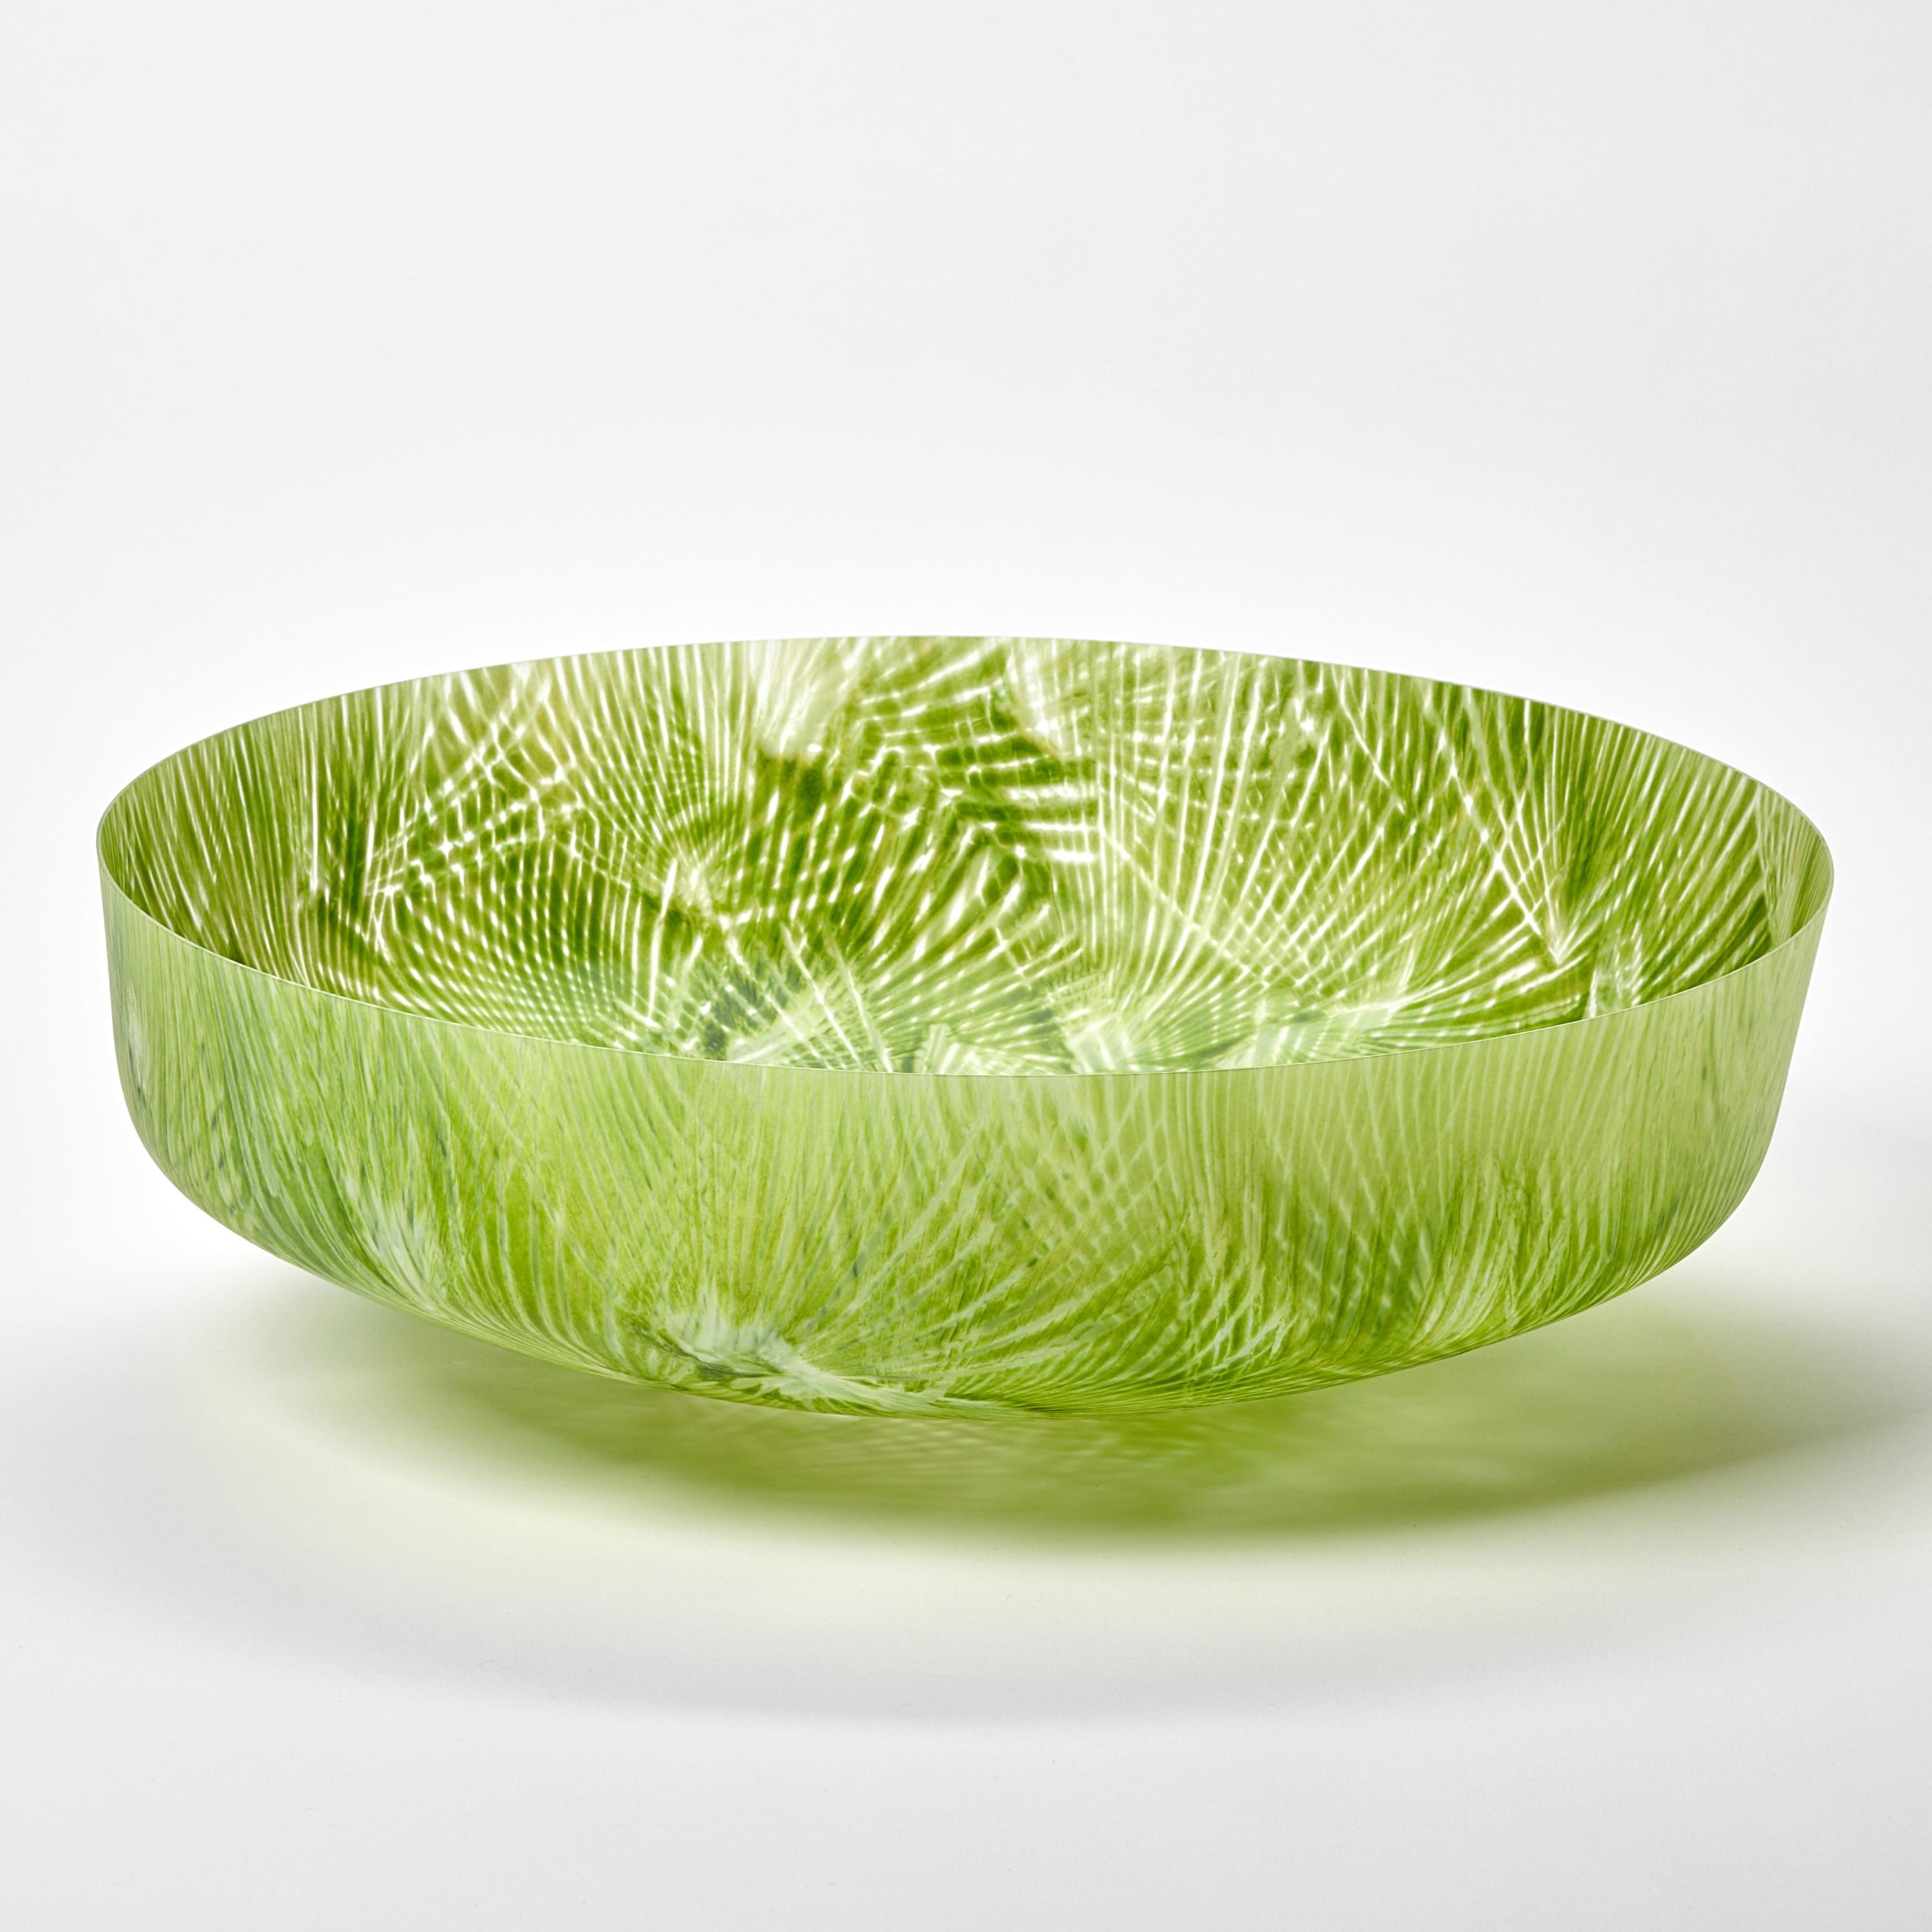 'Taubate' is a unique sculptural bowl and centrepiece by the British artist, Amanda J Simmons.

In the artist's own works;

